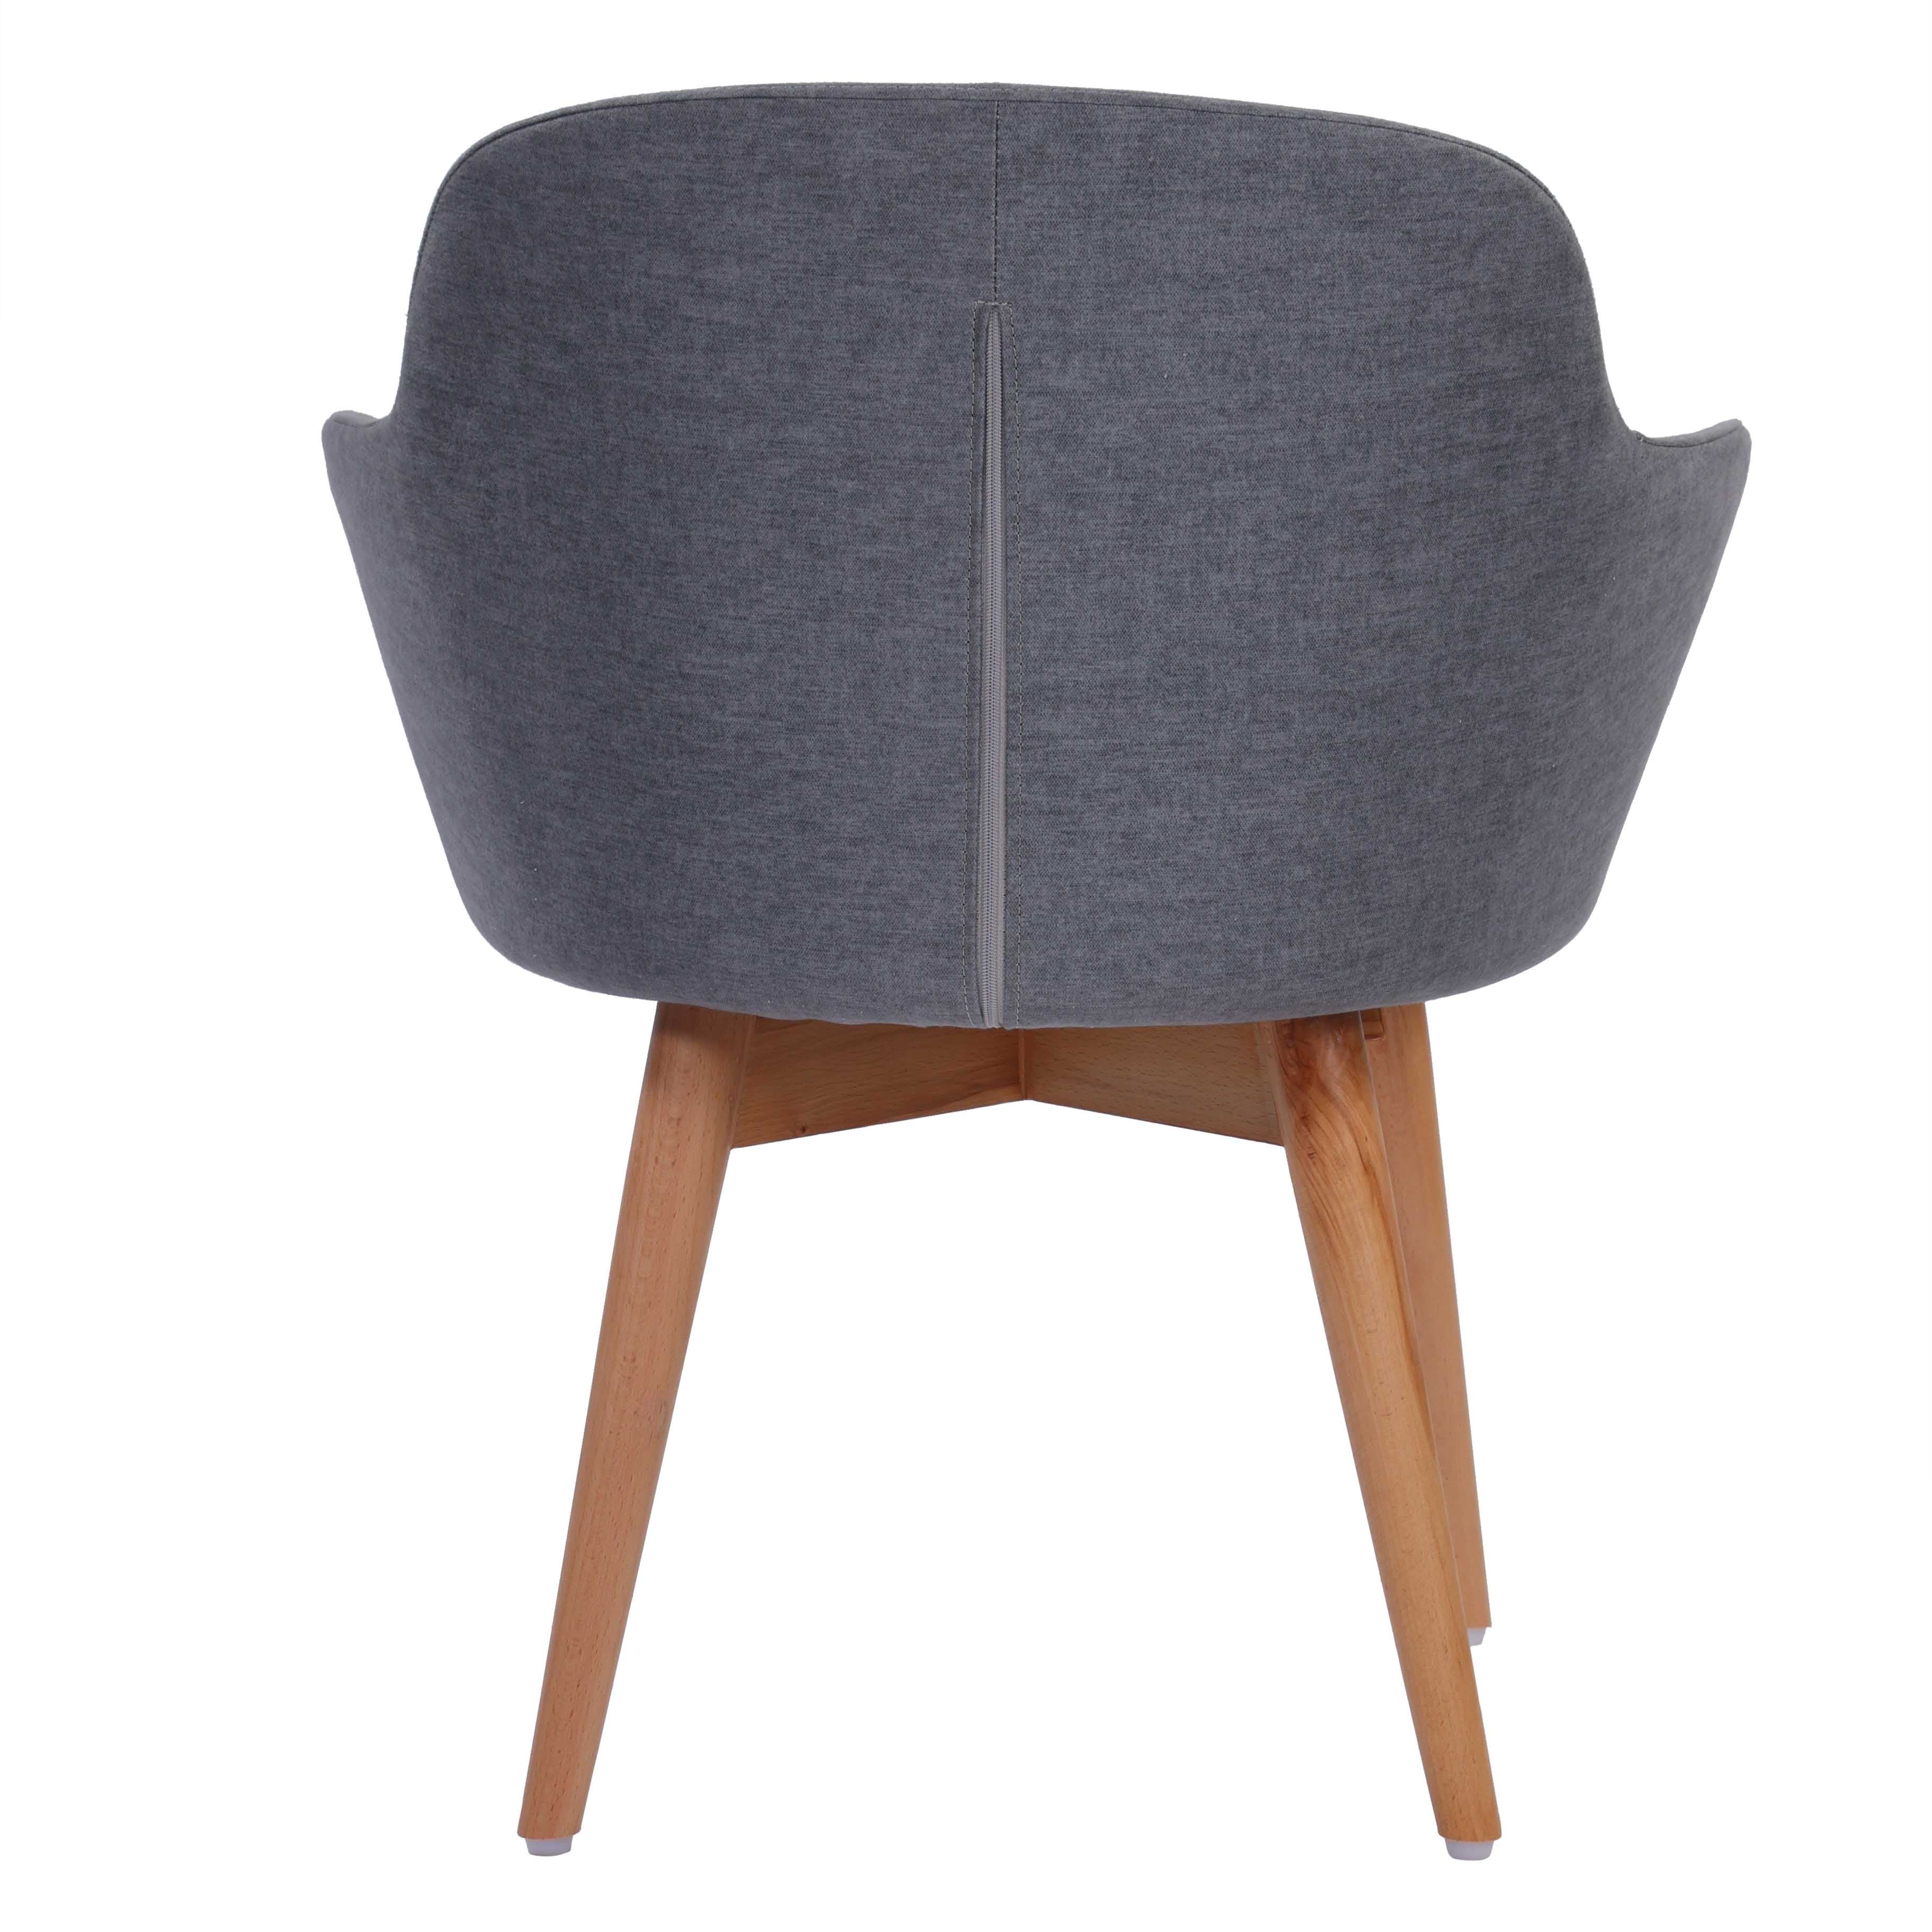 Elsa Living Dining Chair in Upholstered Fabric with Wooden Legs - Grey